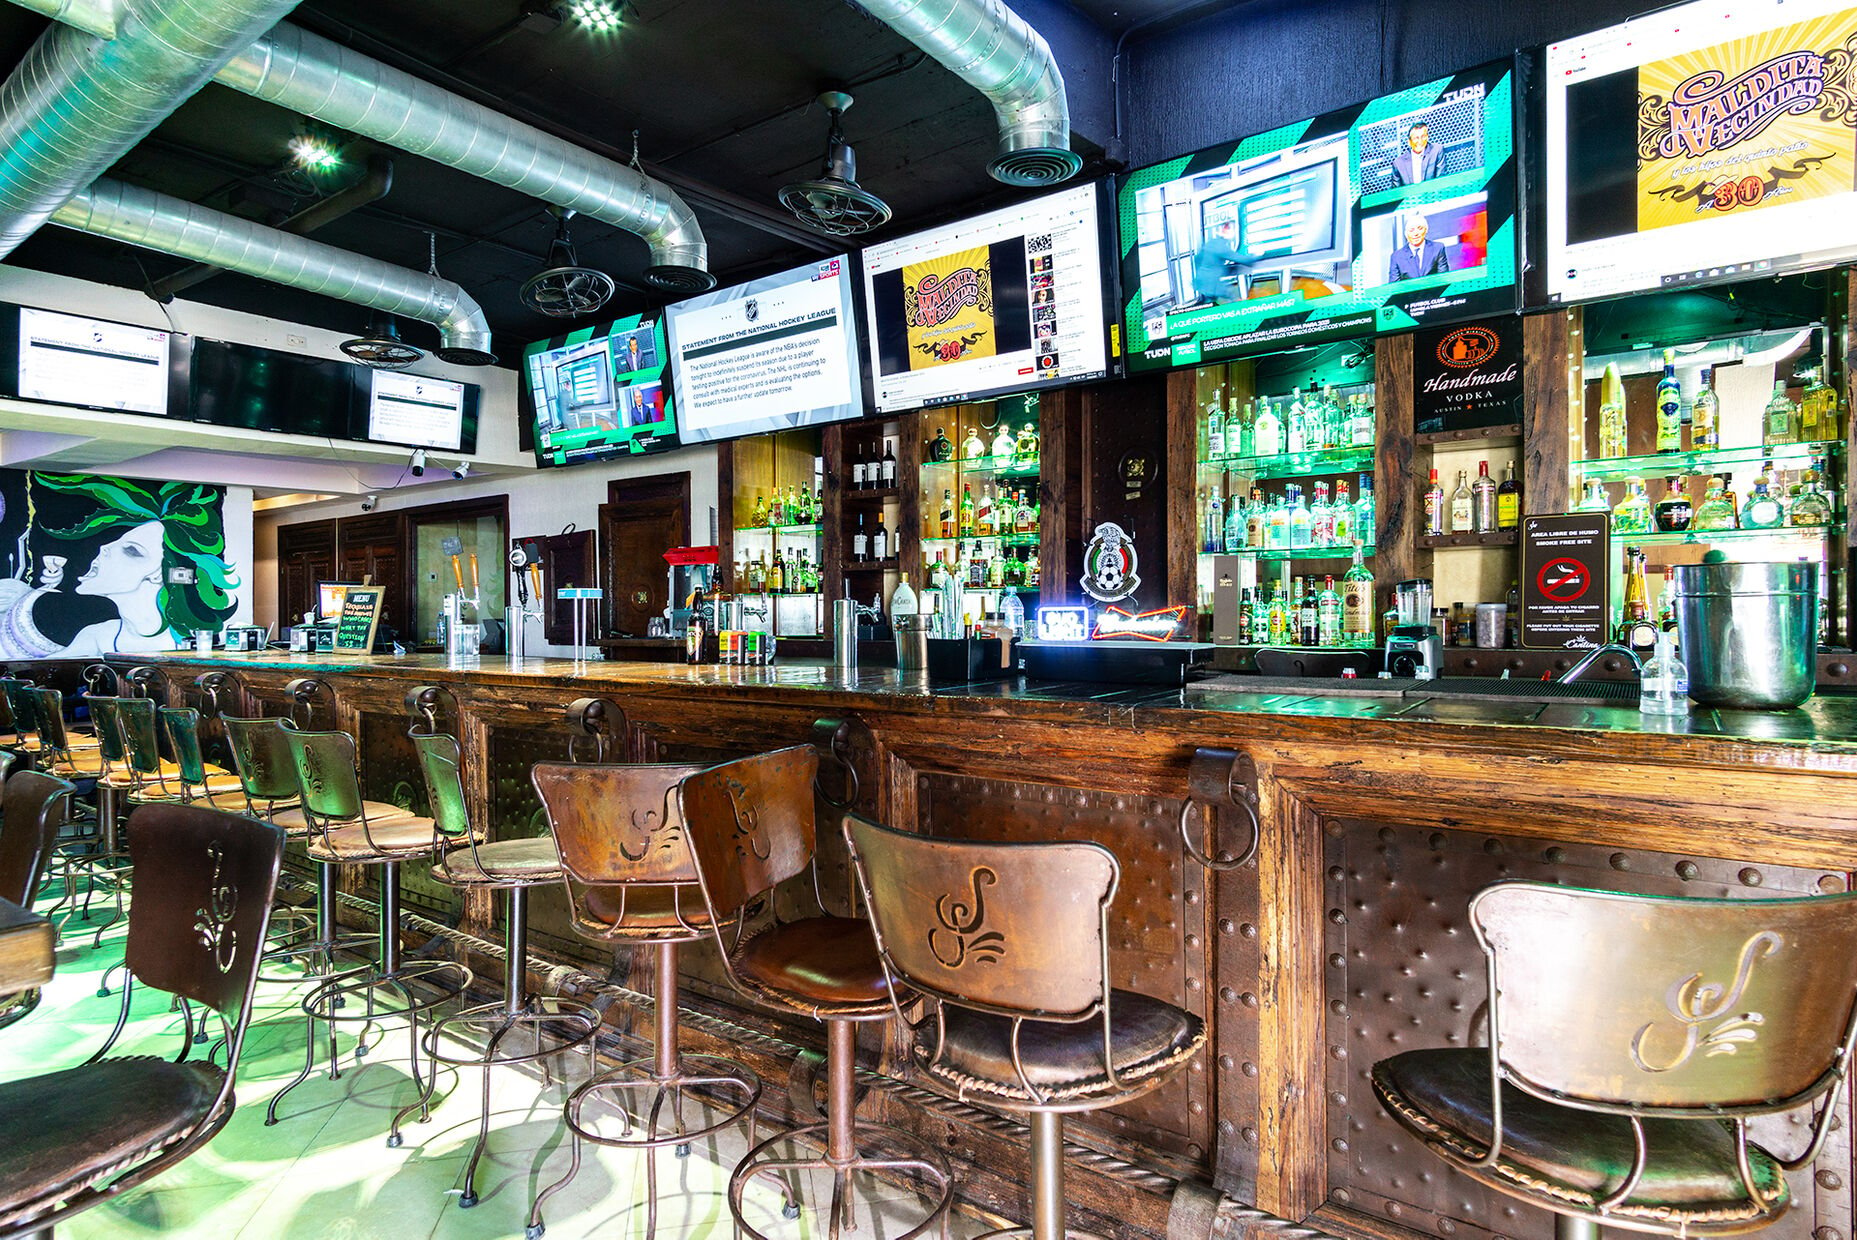 The vibrant spots bar has tons of TV'sm lots of seating, and great drink specials.